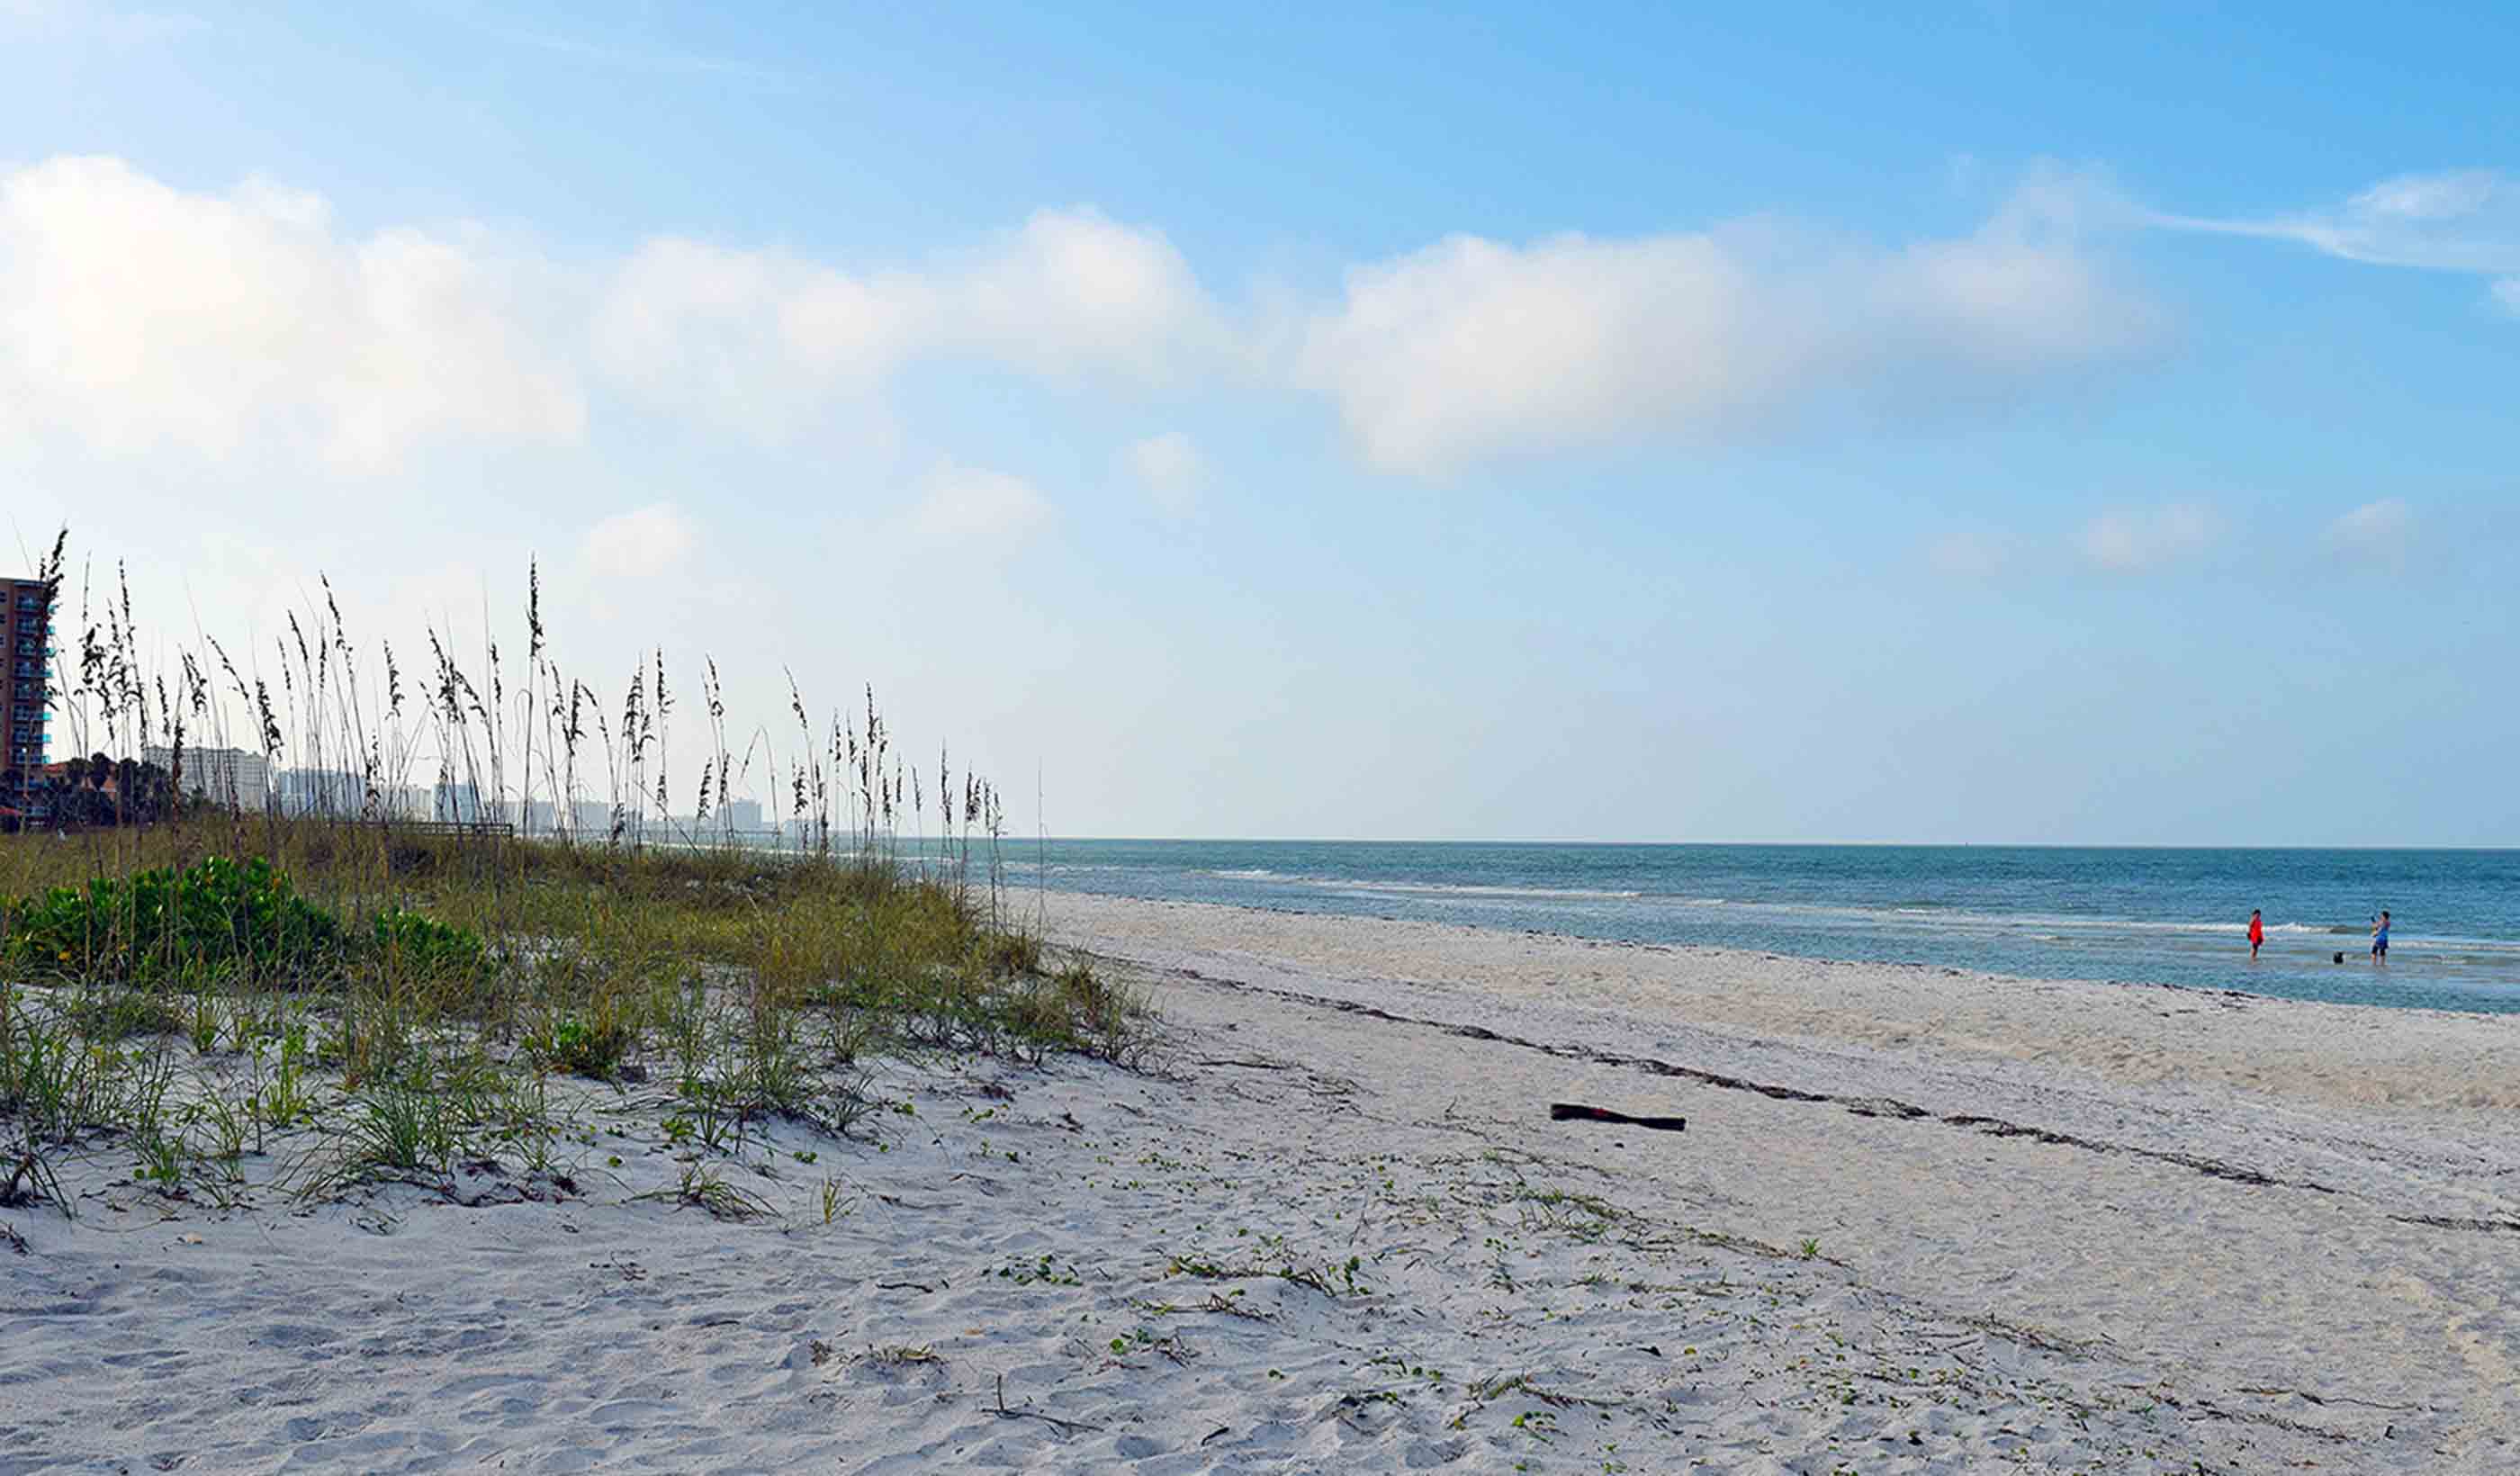 Published in Florida Water Resources Journal: Keys to Planning, Designing, and Permitting Resilient Coastal Restoration Projects